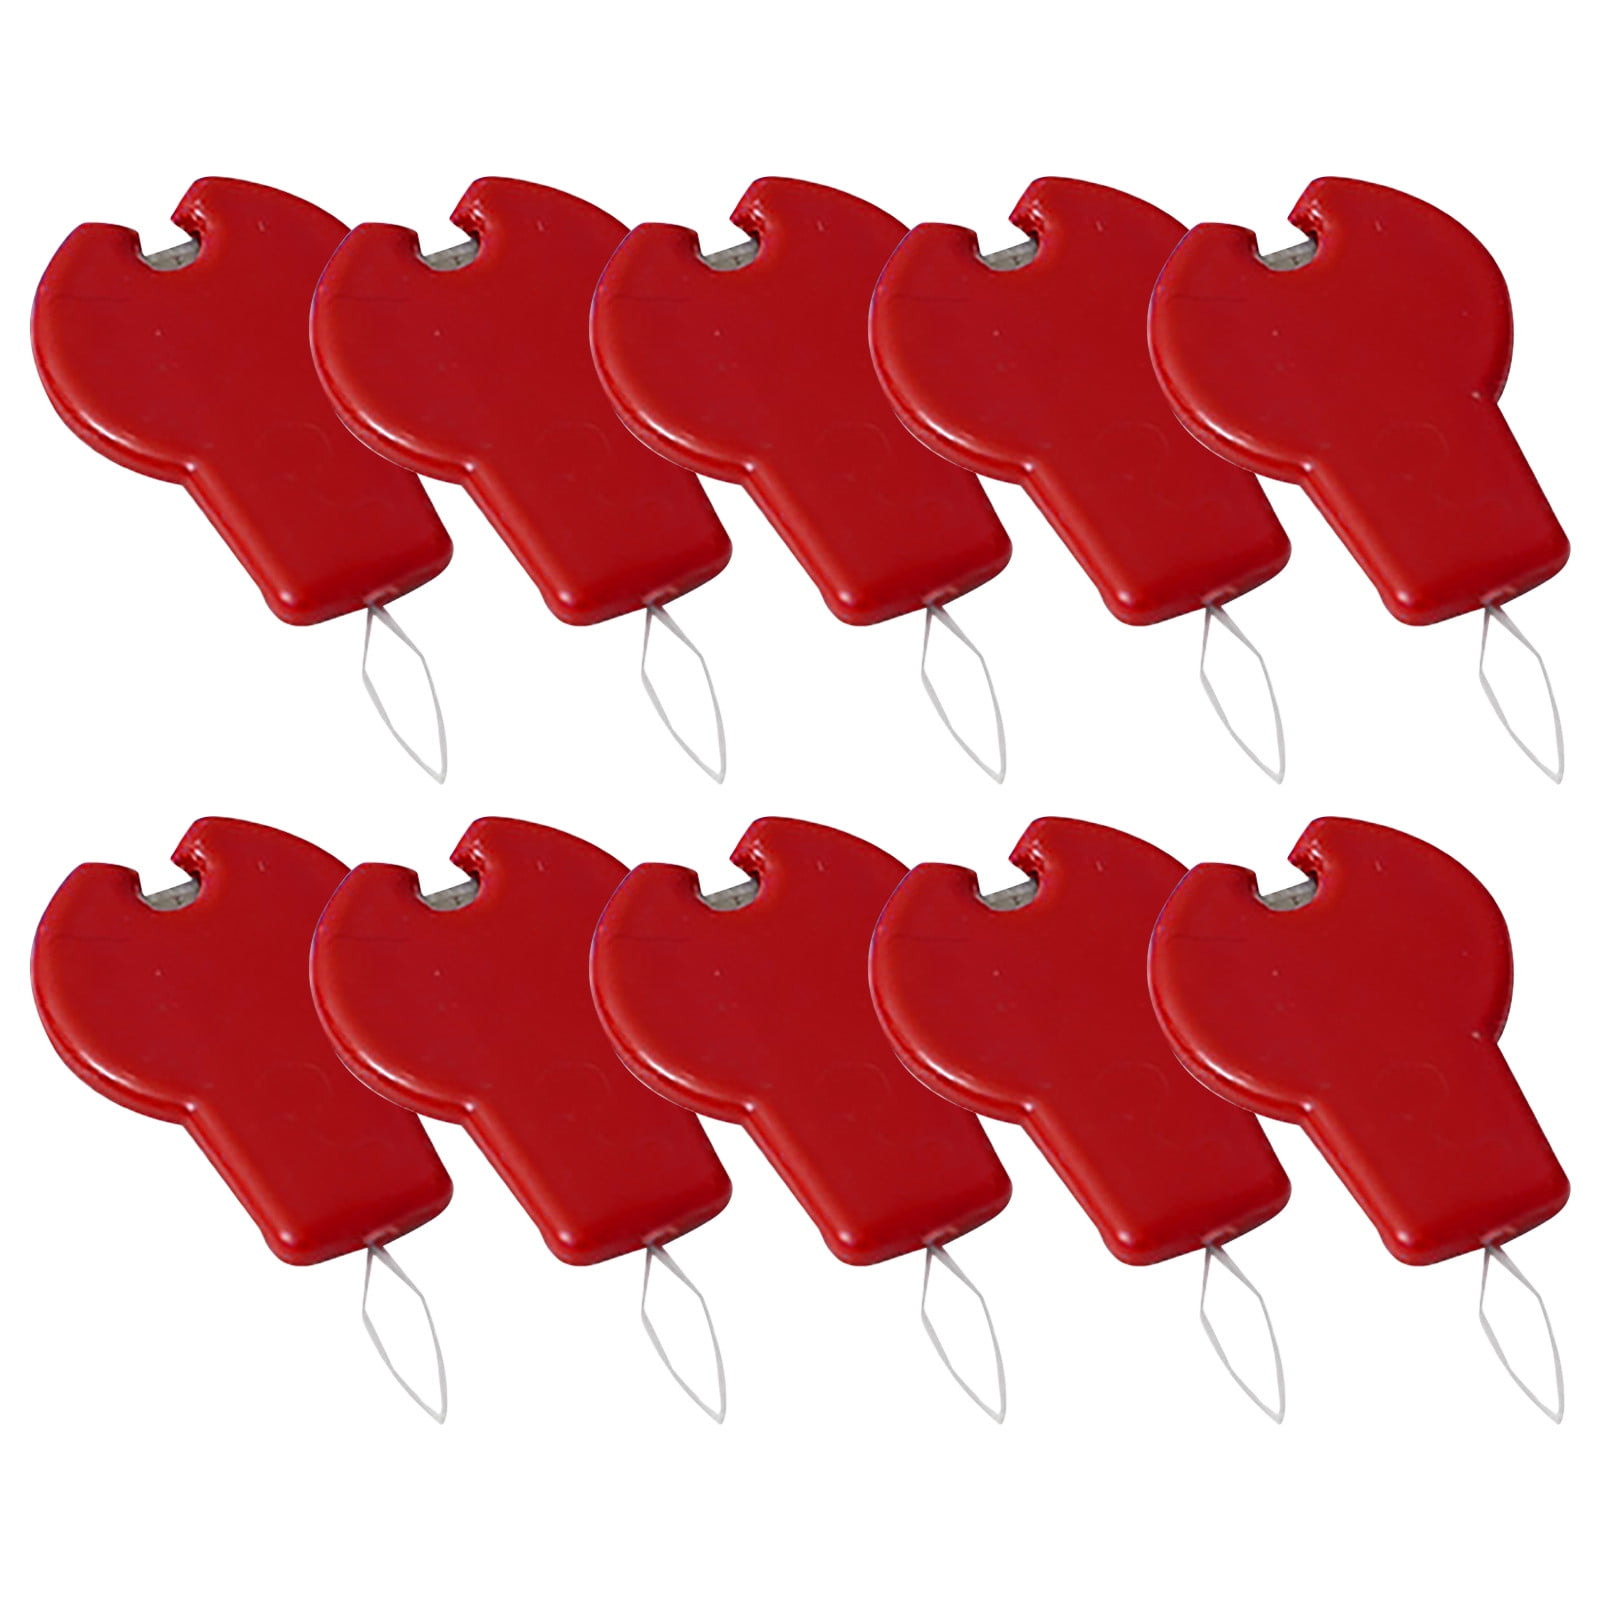 Discounted Bow Style Needle Threaders in Pack of 10 - Mitsy Kit